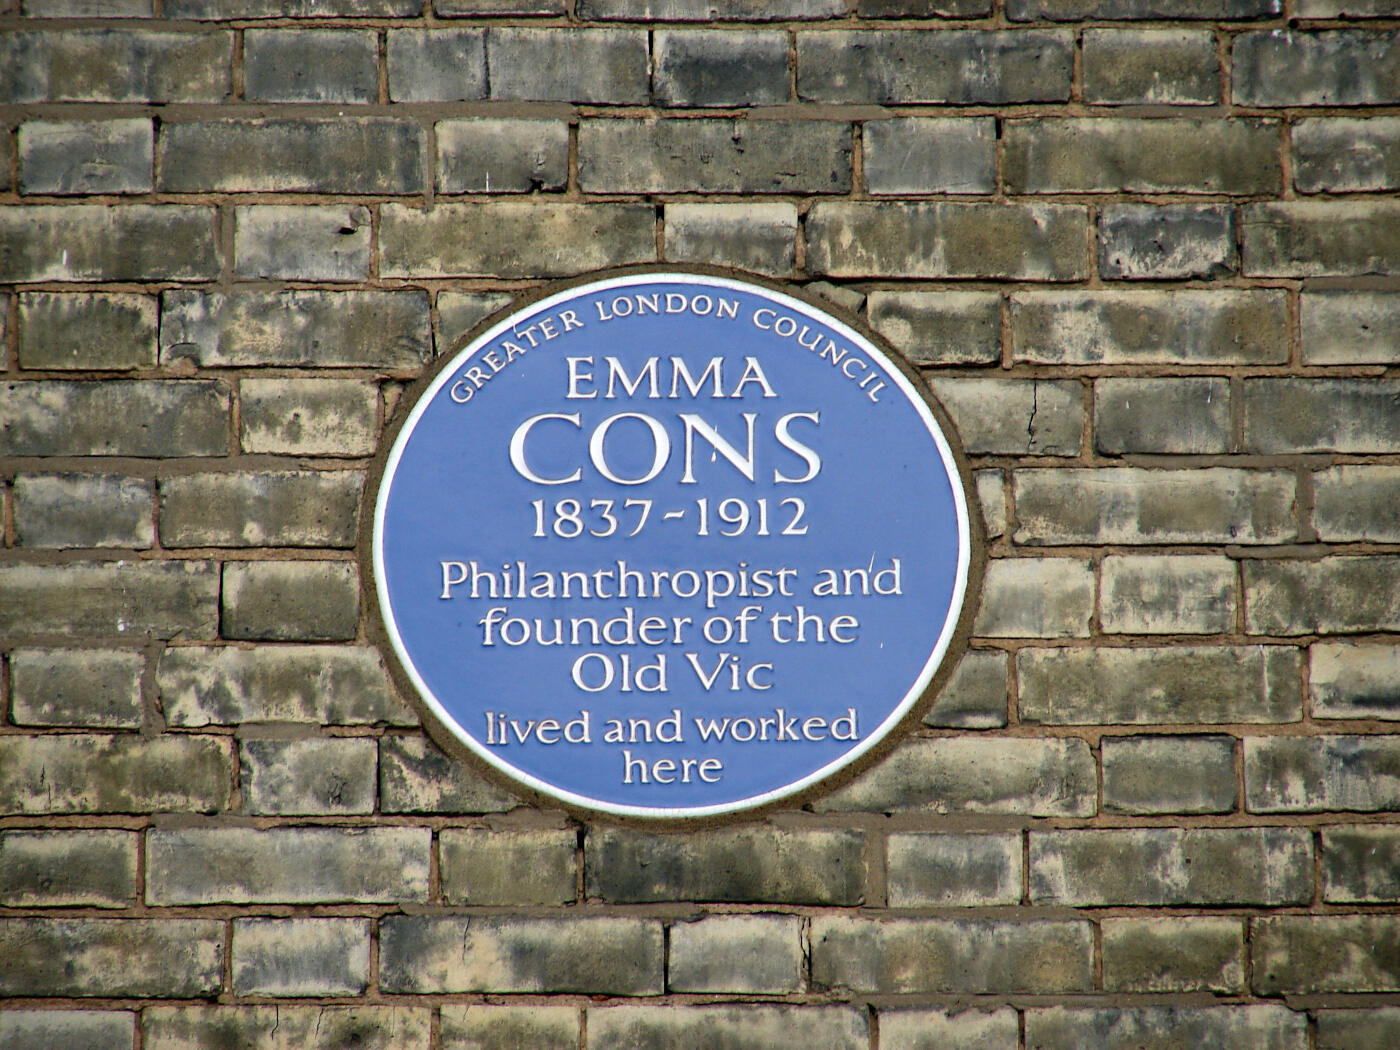 Blue plaque on wall commemorating Emma Cons